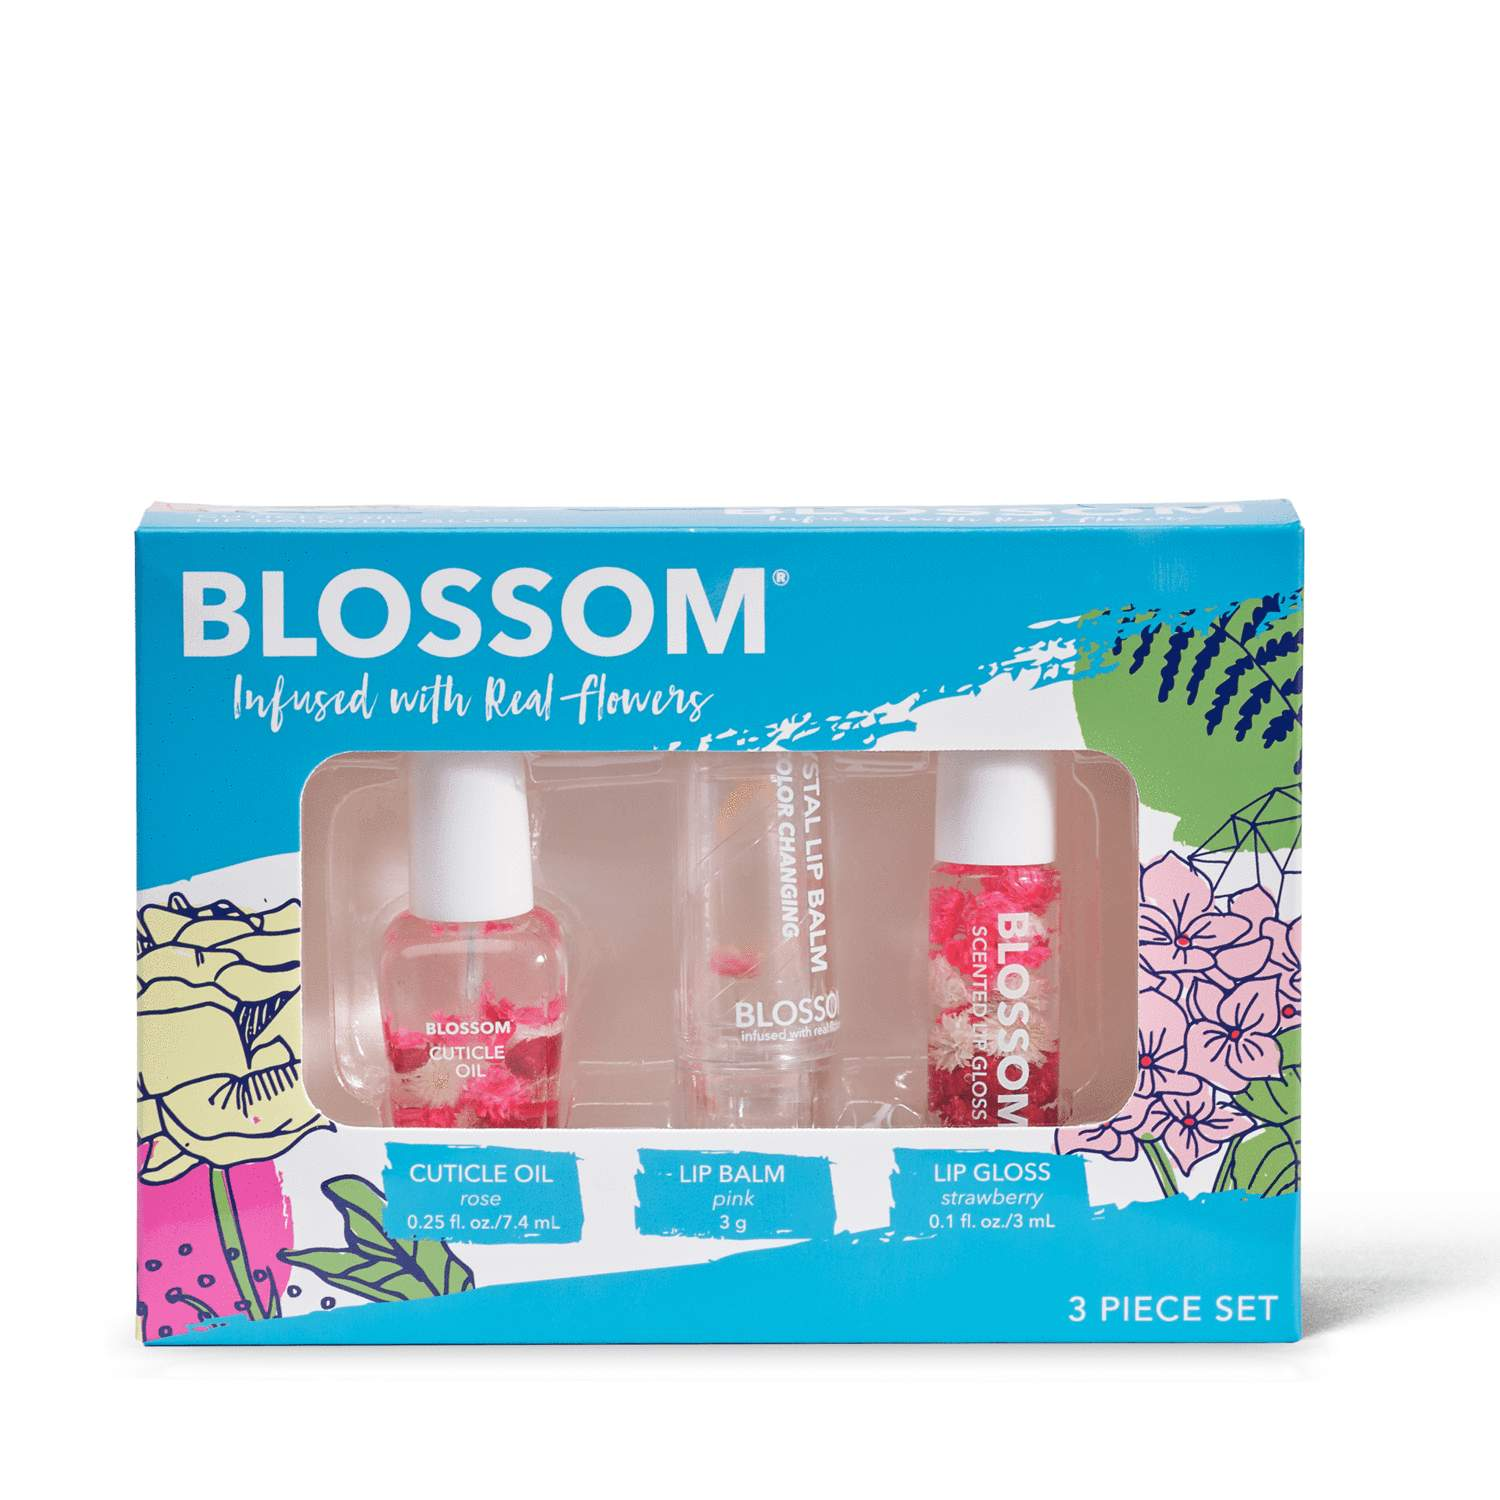 Blossom 3 Piece Set Cuticle Oil Rose, Color-Changing Crystal Lip Balm Pink, Mini-Roll-On Lip Gloss Strawberry-Blossom-Blossom_ Color Changing Lip Balm's,Blossom_ Cuticle Oil 's,Blossom_ Gift Set's,Brand_Blossom,Collection_Gifts,Gifts_Under 25